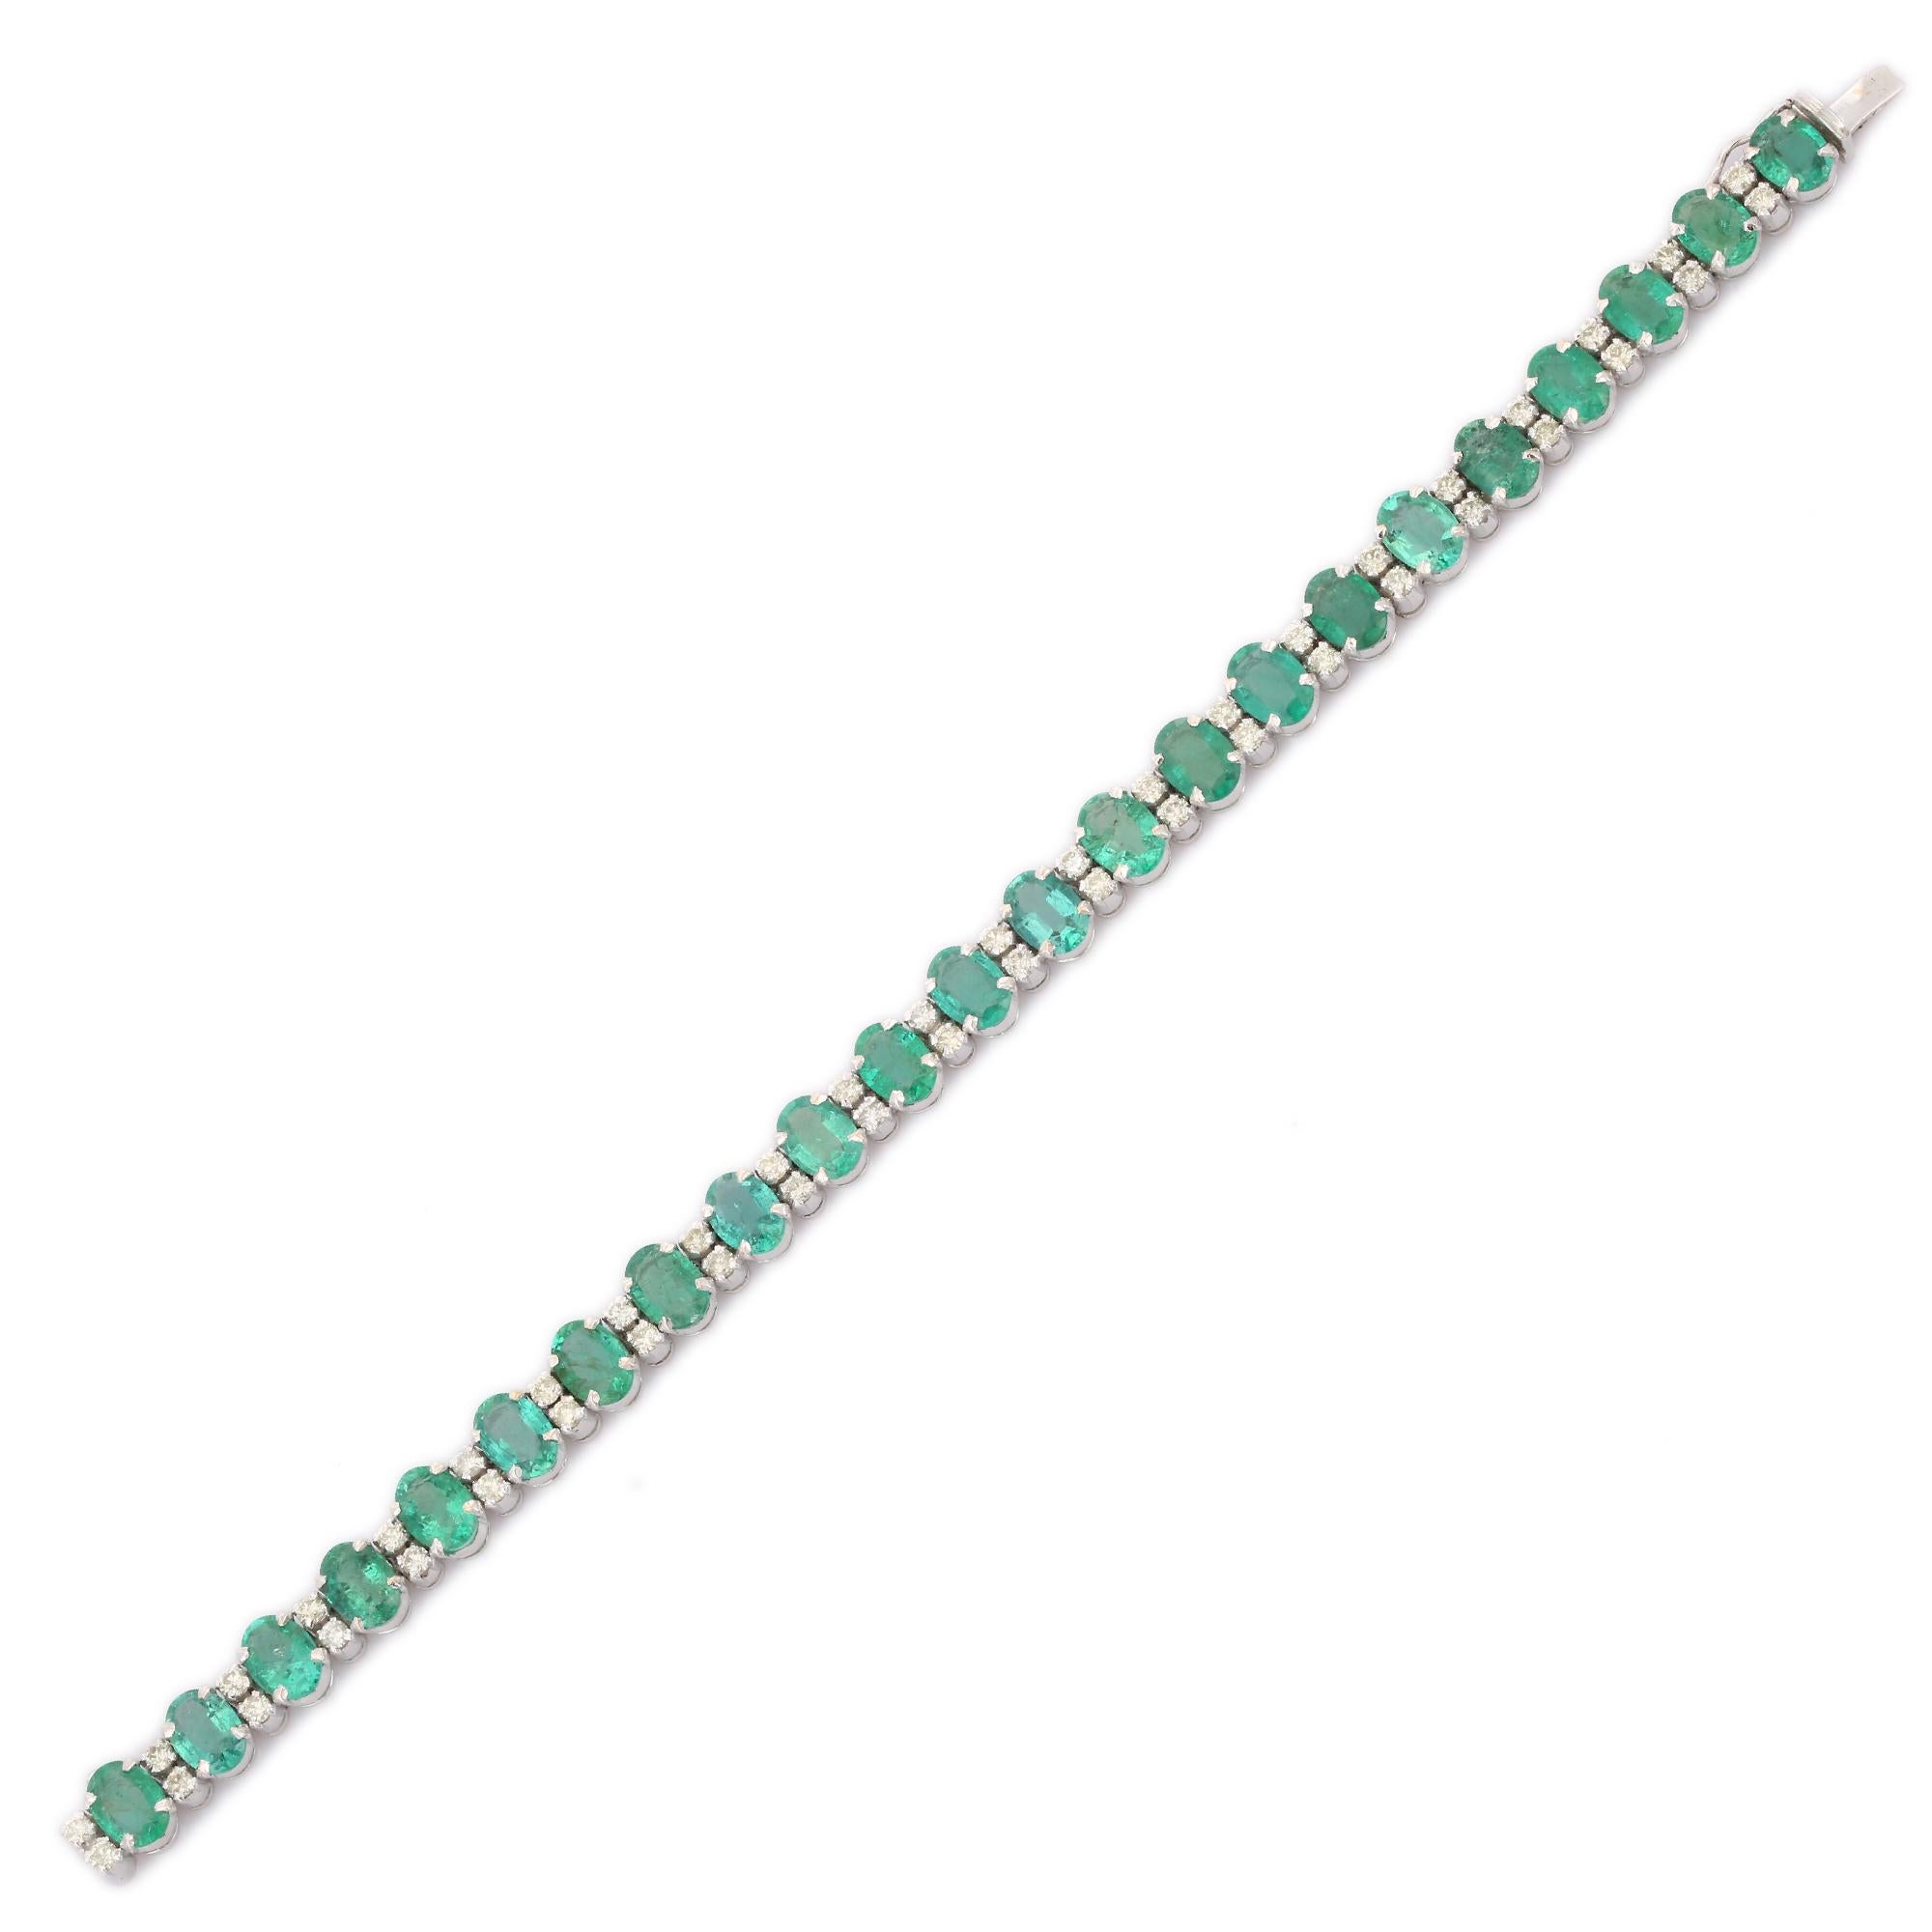 This Handcrafted Natural Emerald Diamond Tennis Bracelet in 14K gold showcases 23 endlessly sparkling natural emeralds, weighing 16.07 carats and 46 pieces of diamonds weighing 1.90 carat. It measures 7 inches long in length. 
Emerald enhances the